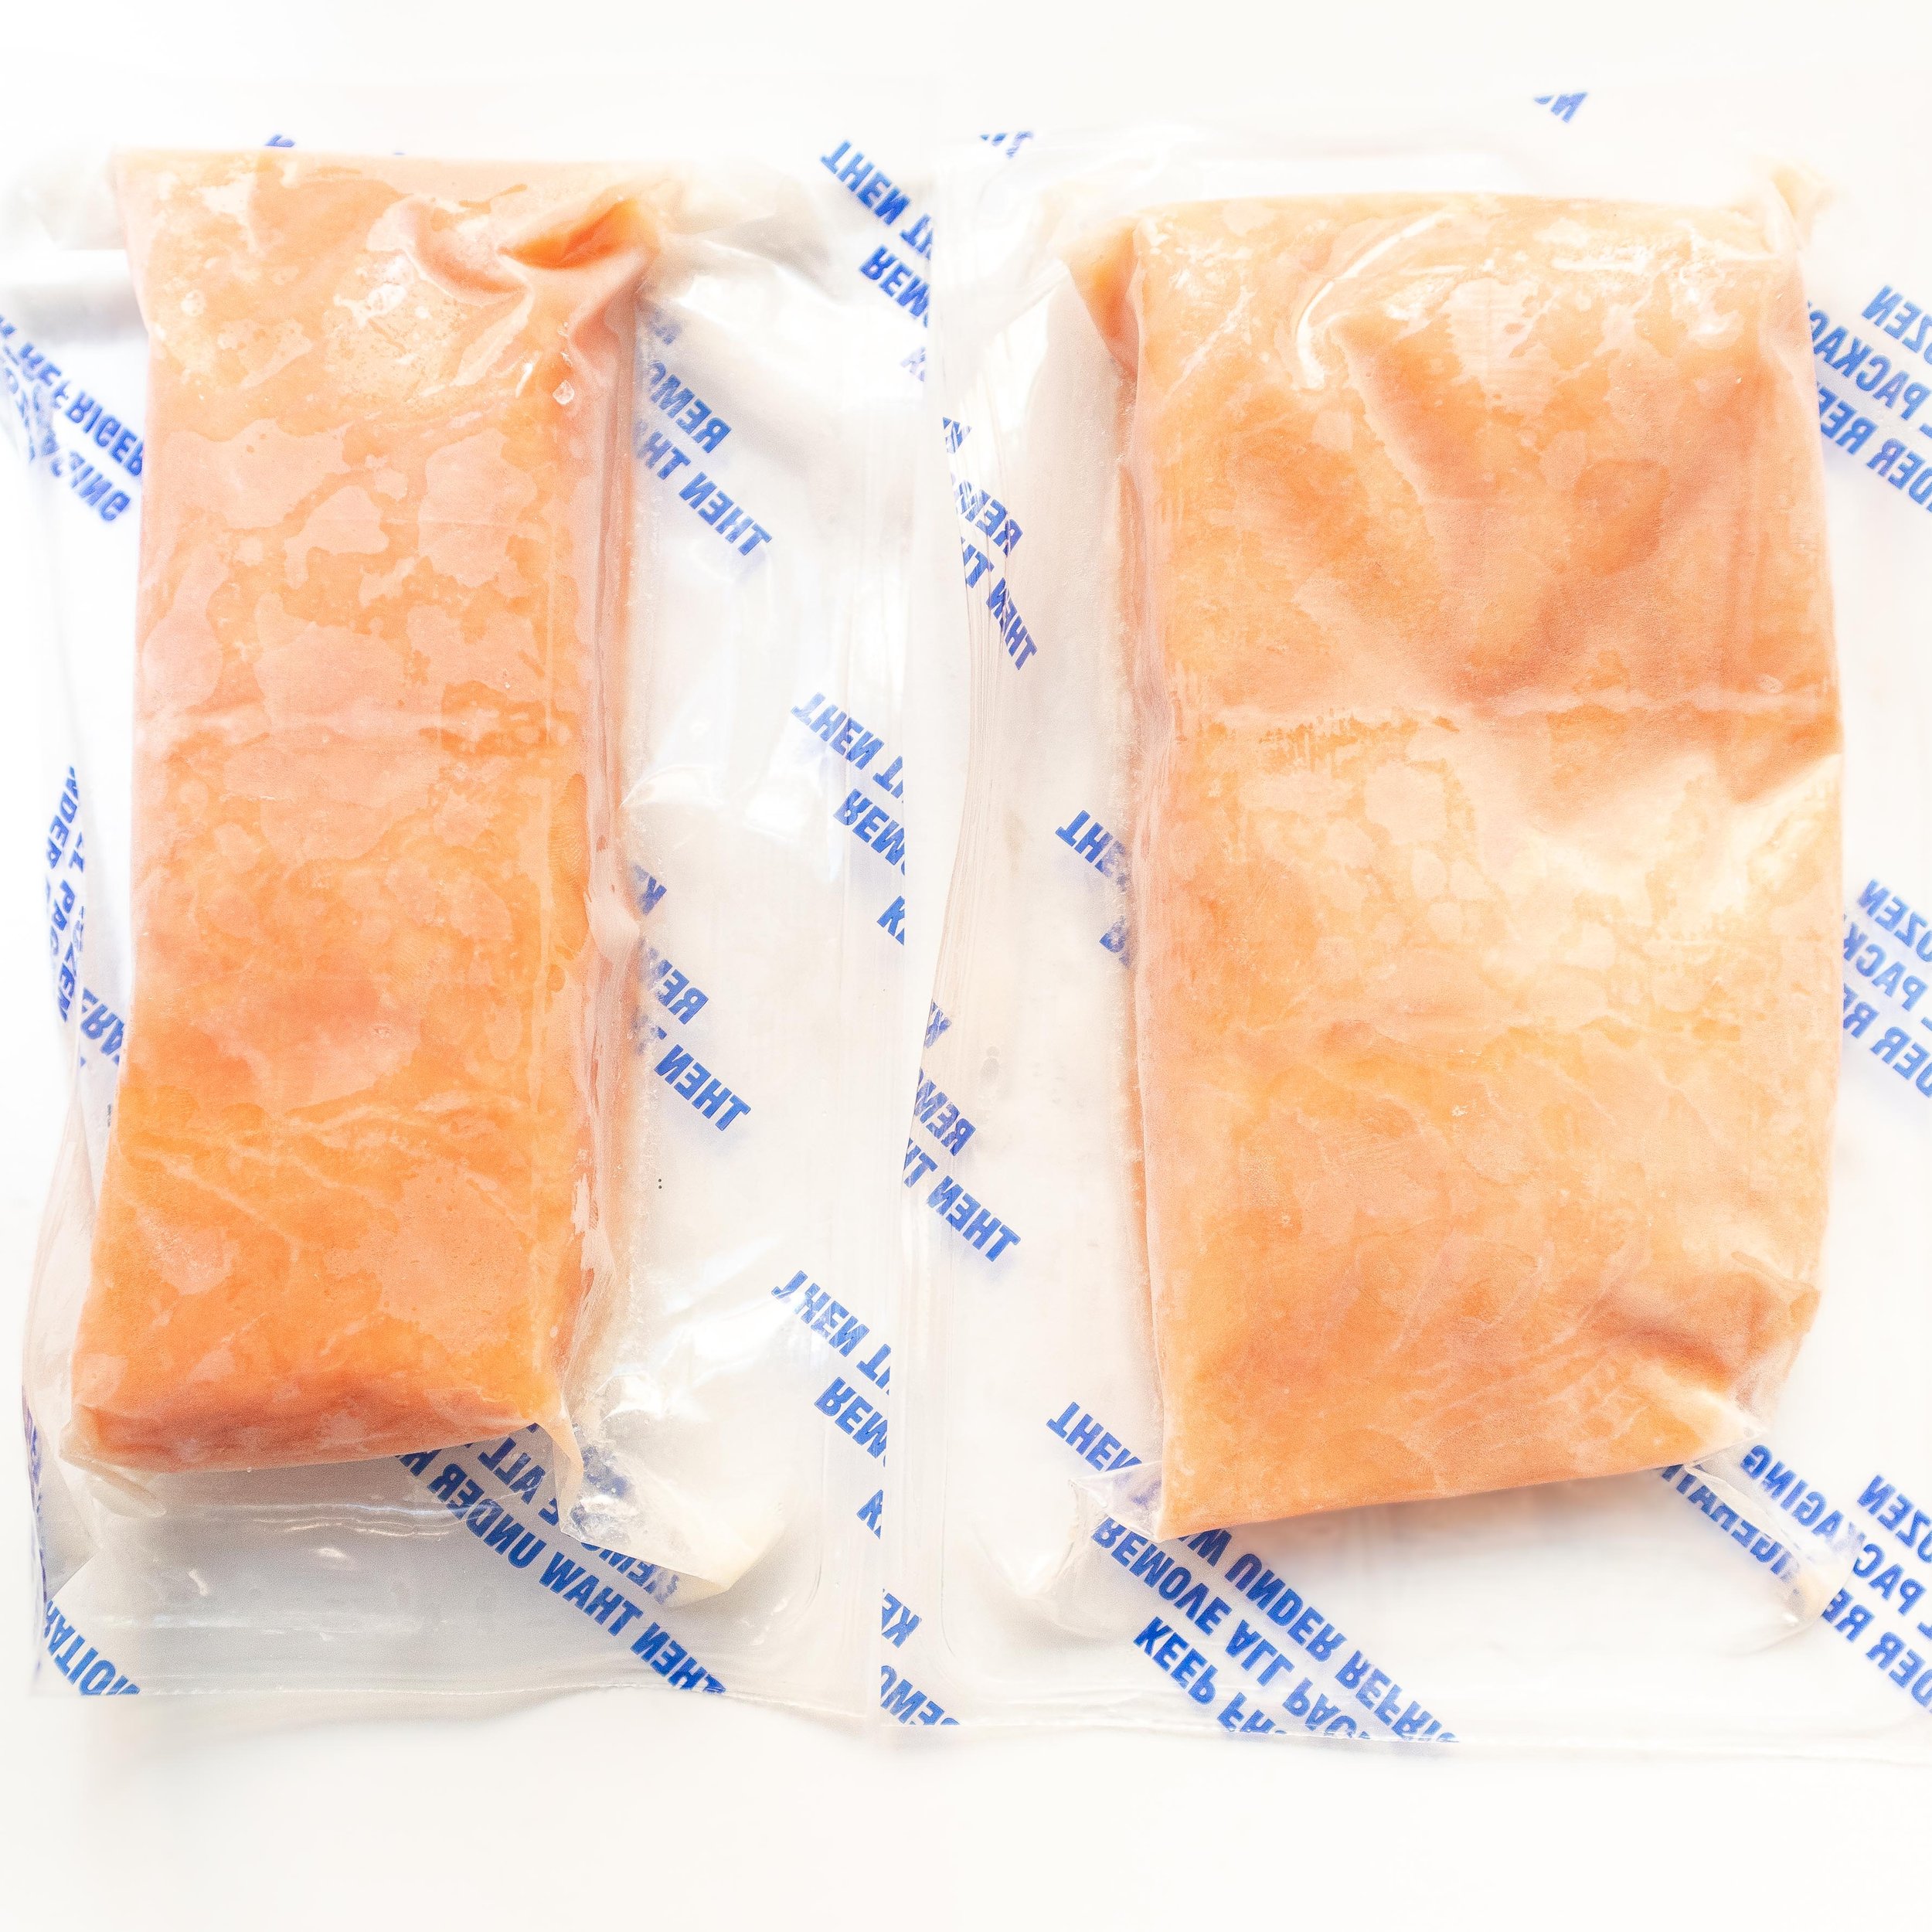 Costco frozen salmon fillets. Each one is about 7-8 oz. For this recipe, I’m using two. To defrost quickly, drop these bags into warm water. Leave as is for the soup or cut into cubes for a shorter cooking time.